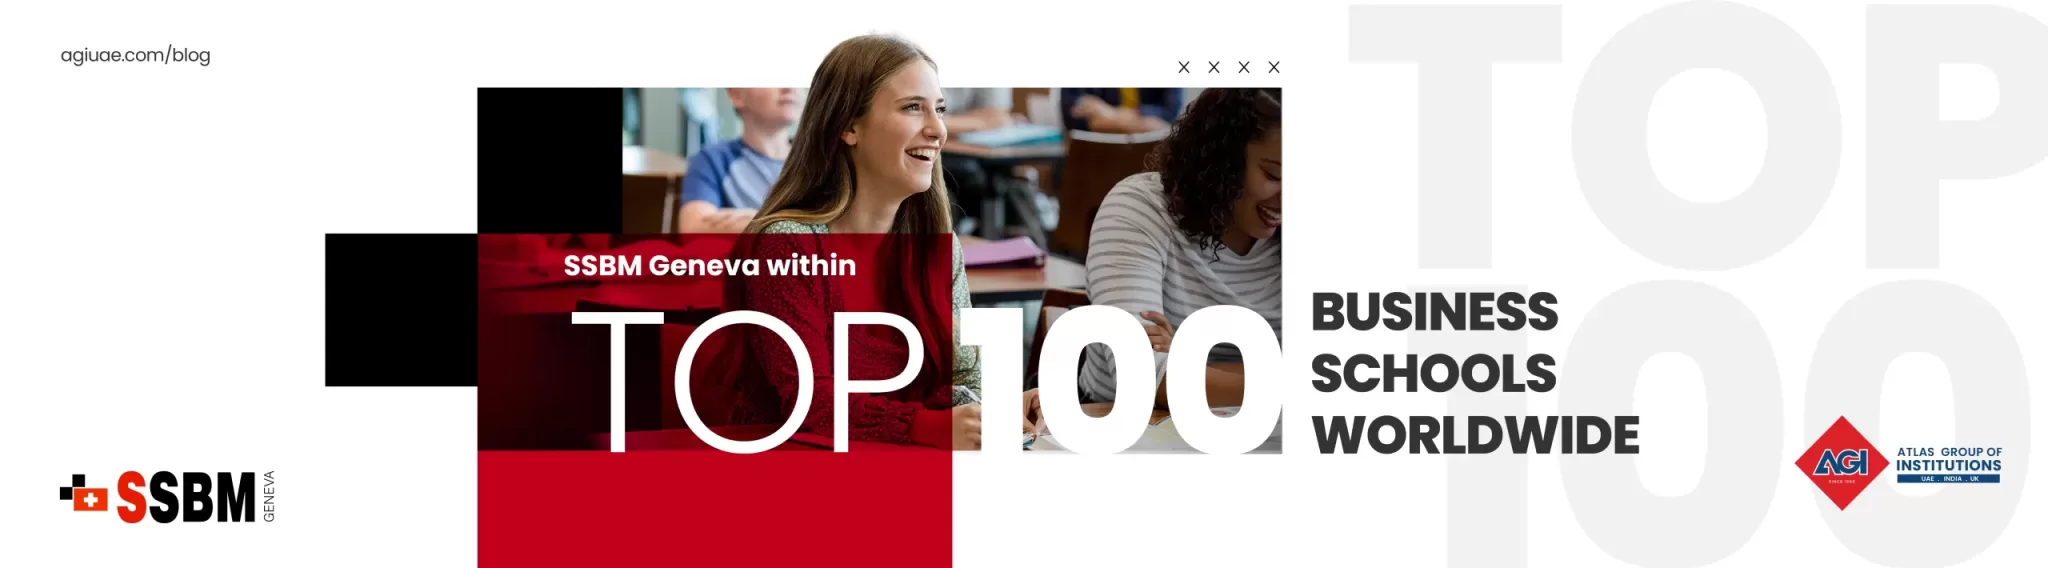 SSBM was selected to the elite list of top 100 business schools in the world by CEO World Magazine.